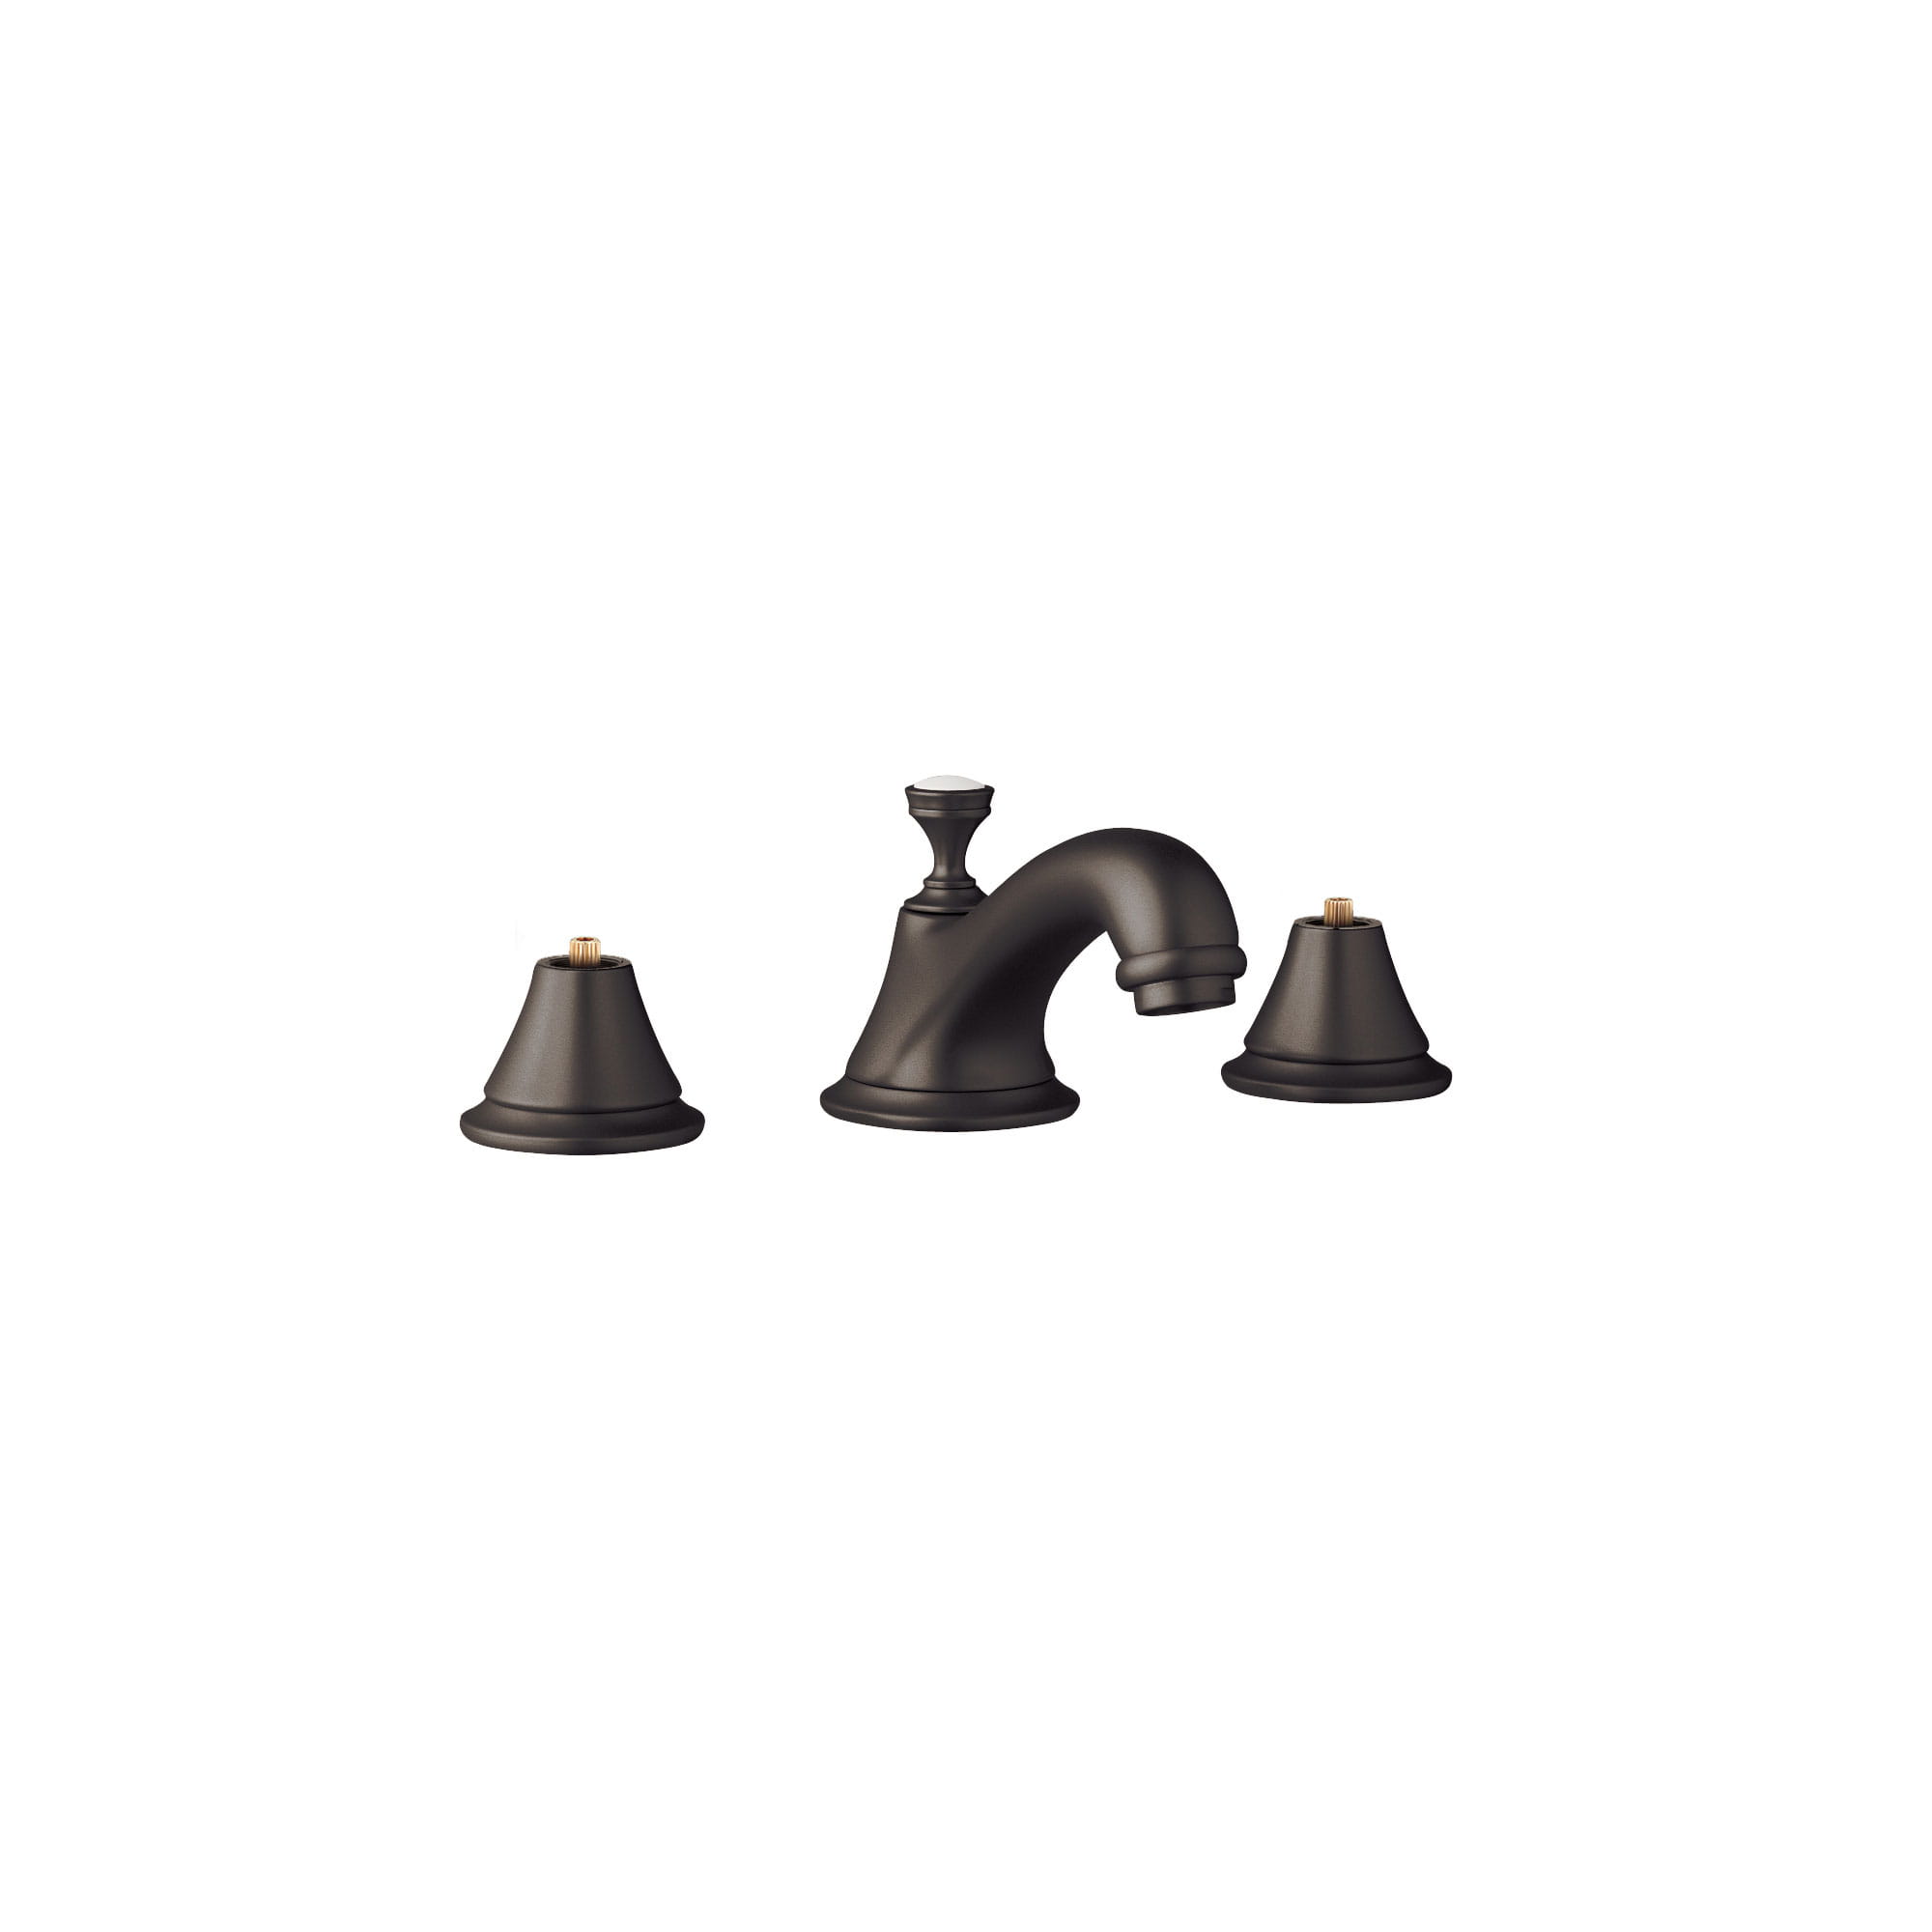 Lavatory Wideset 12 gpm GROHE OIL RUBBED BRONZE